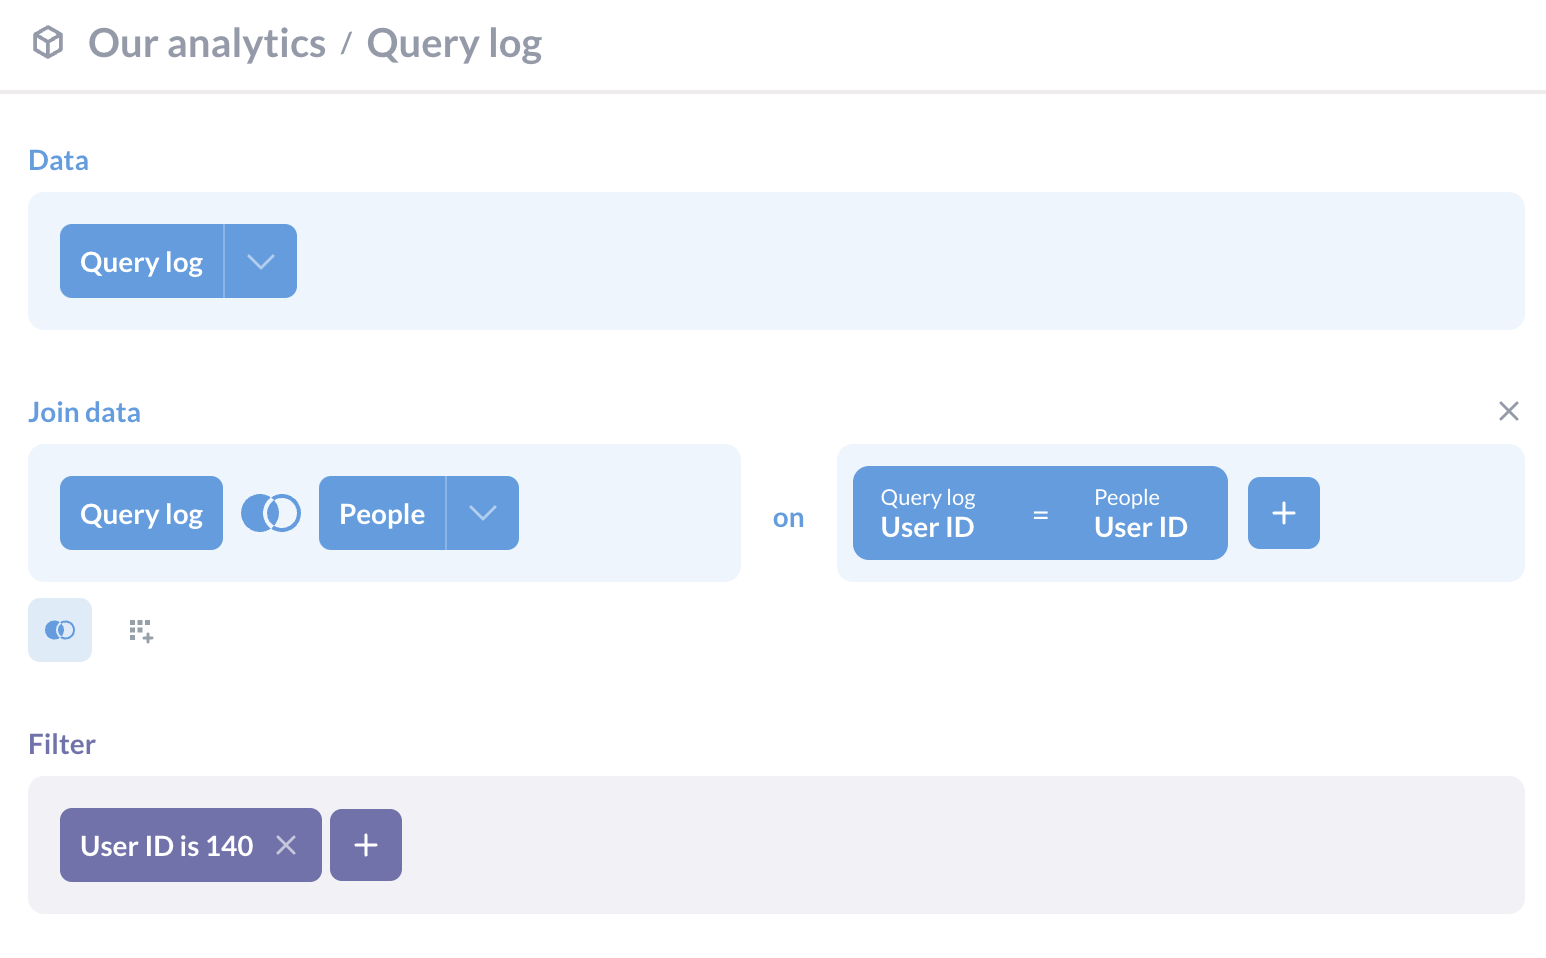 A query that joins the query log with the people model on user ID